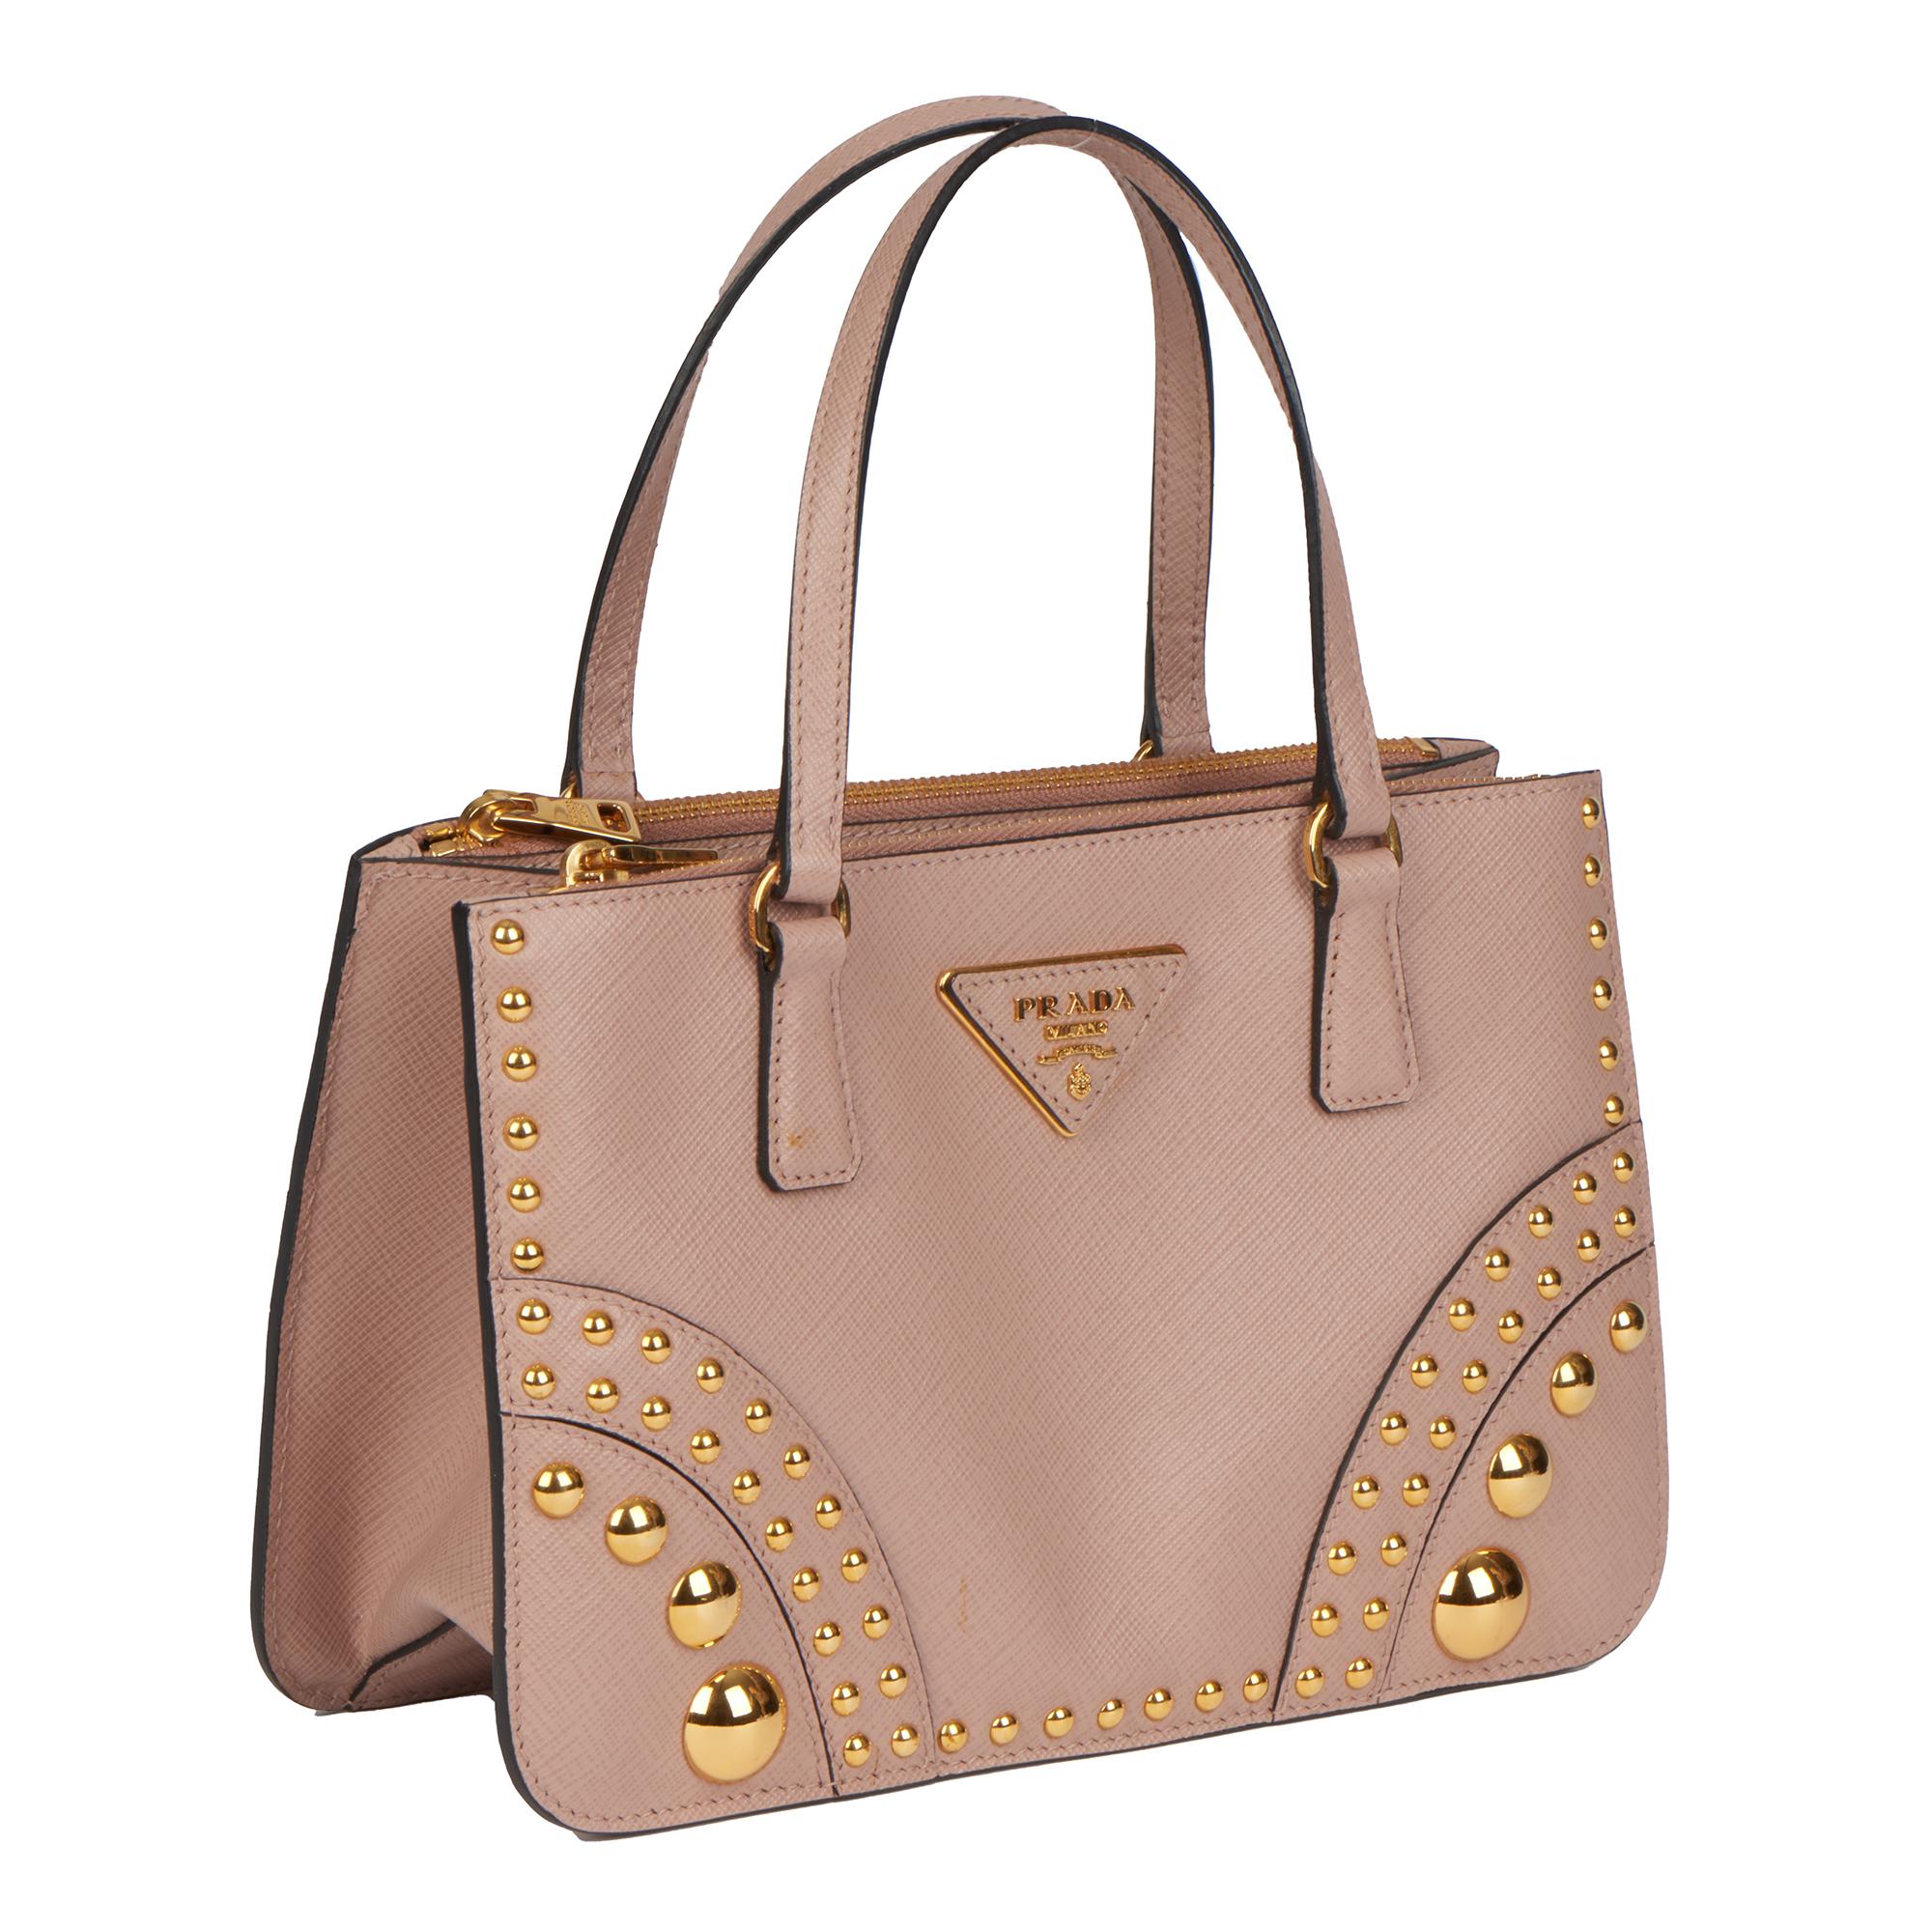 Prada BEIGE STUDDED SAFFIANO LEATHER DOUBLE ZIP TOTE

CONDITION NOTES
The exterior is in excellent condition with minimal signs of use.
The interior is in excellent condition with minimal signs of use.
The hardware is in excellent condition with